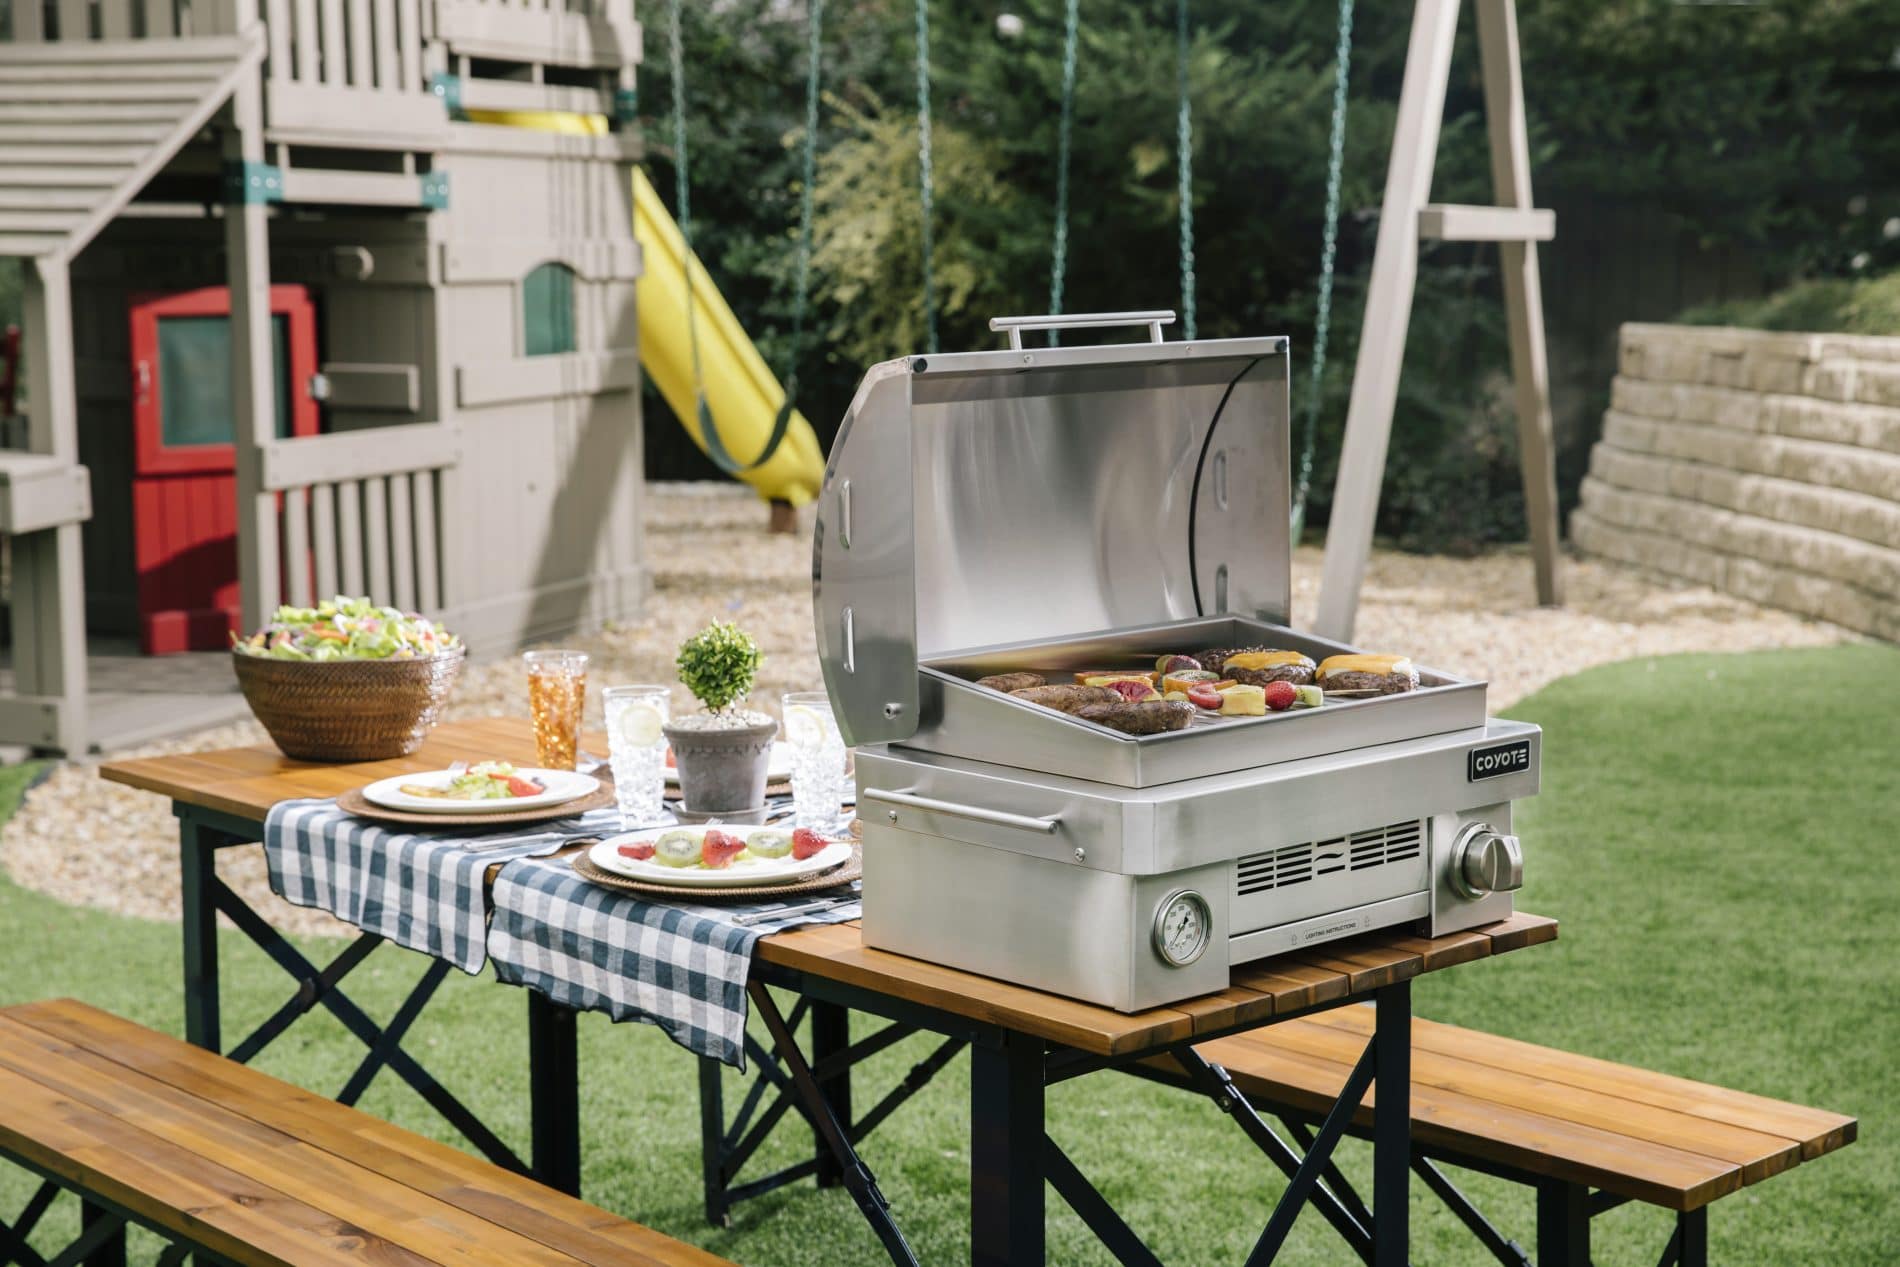 25 Propane Portable Grill Great For Road Trips & Tailgating